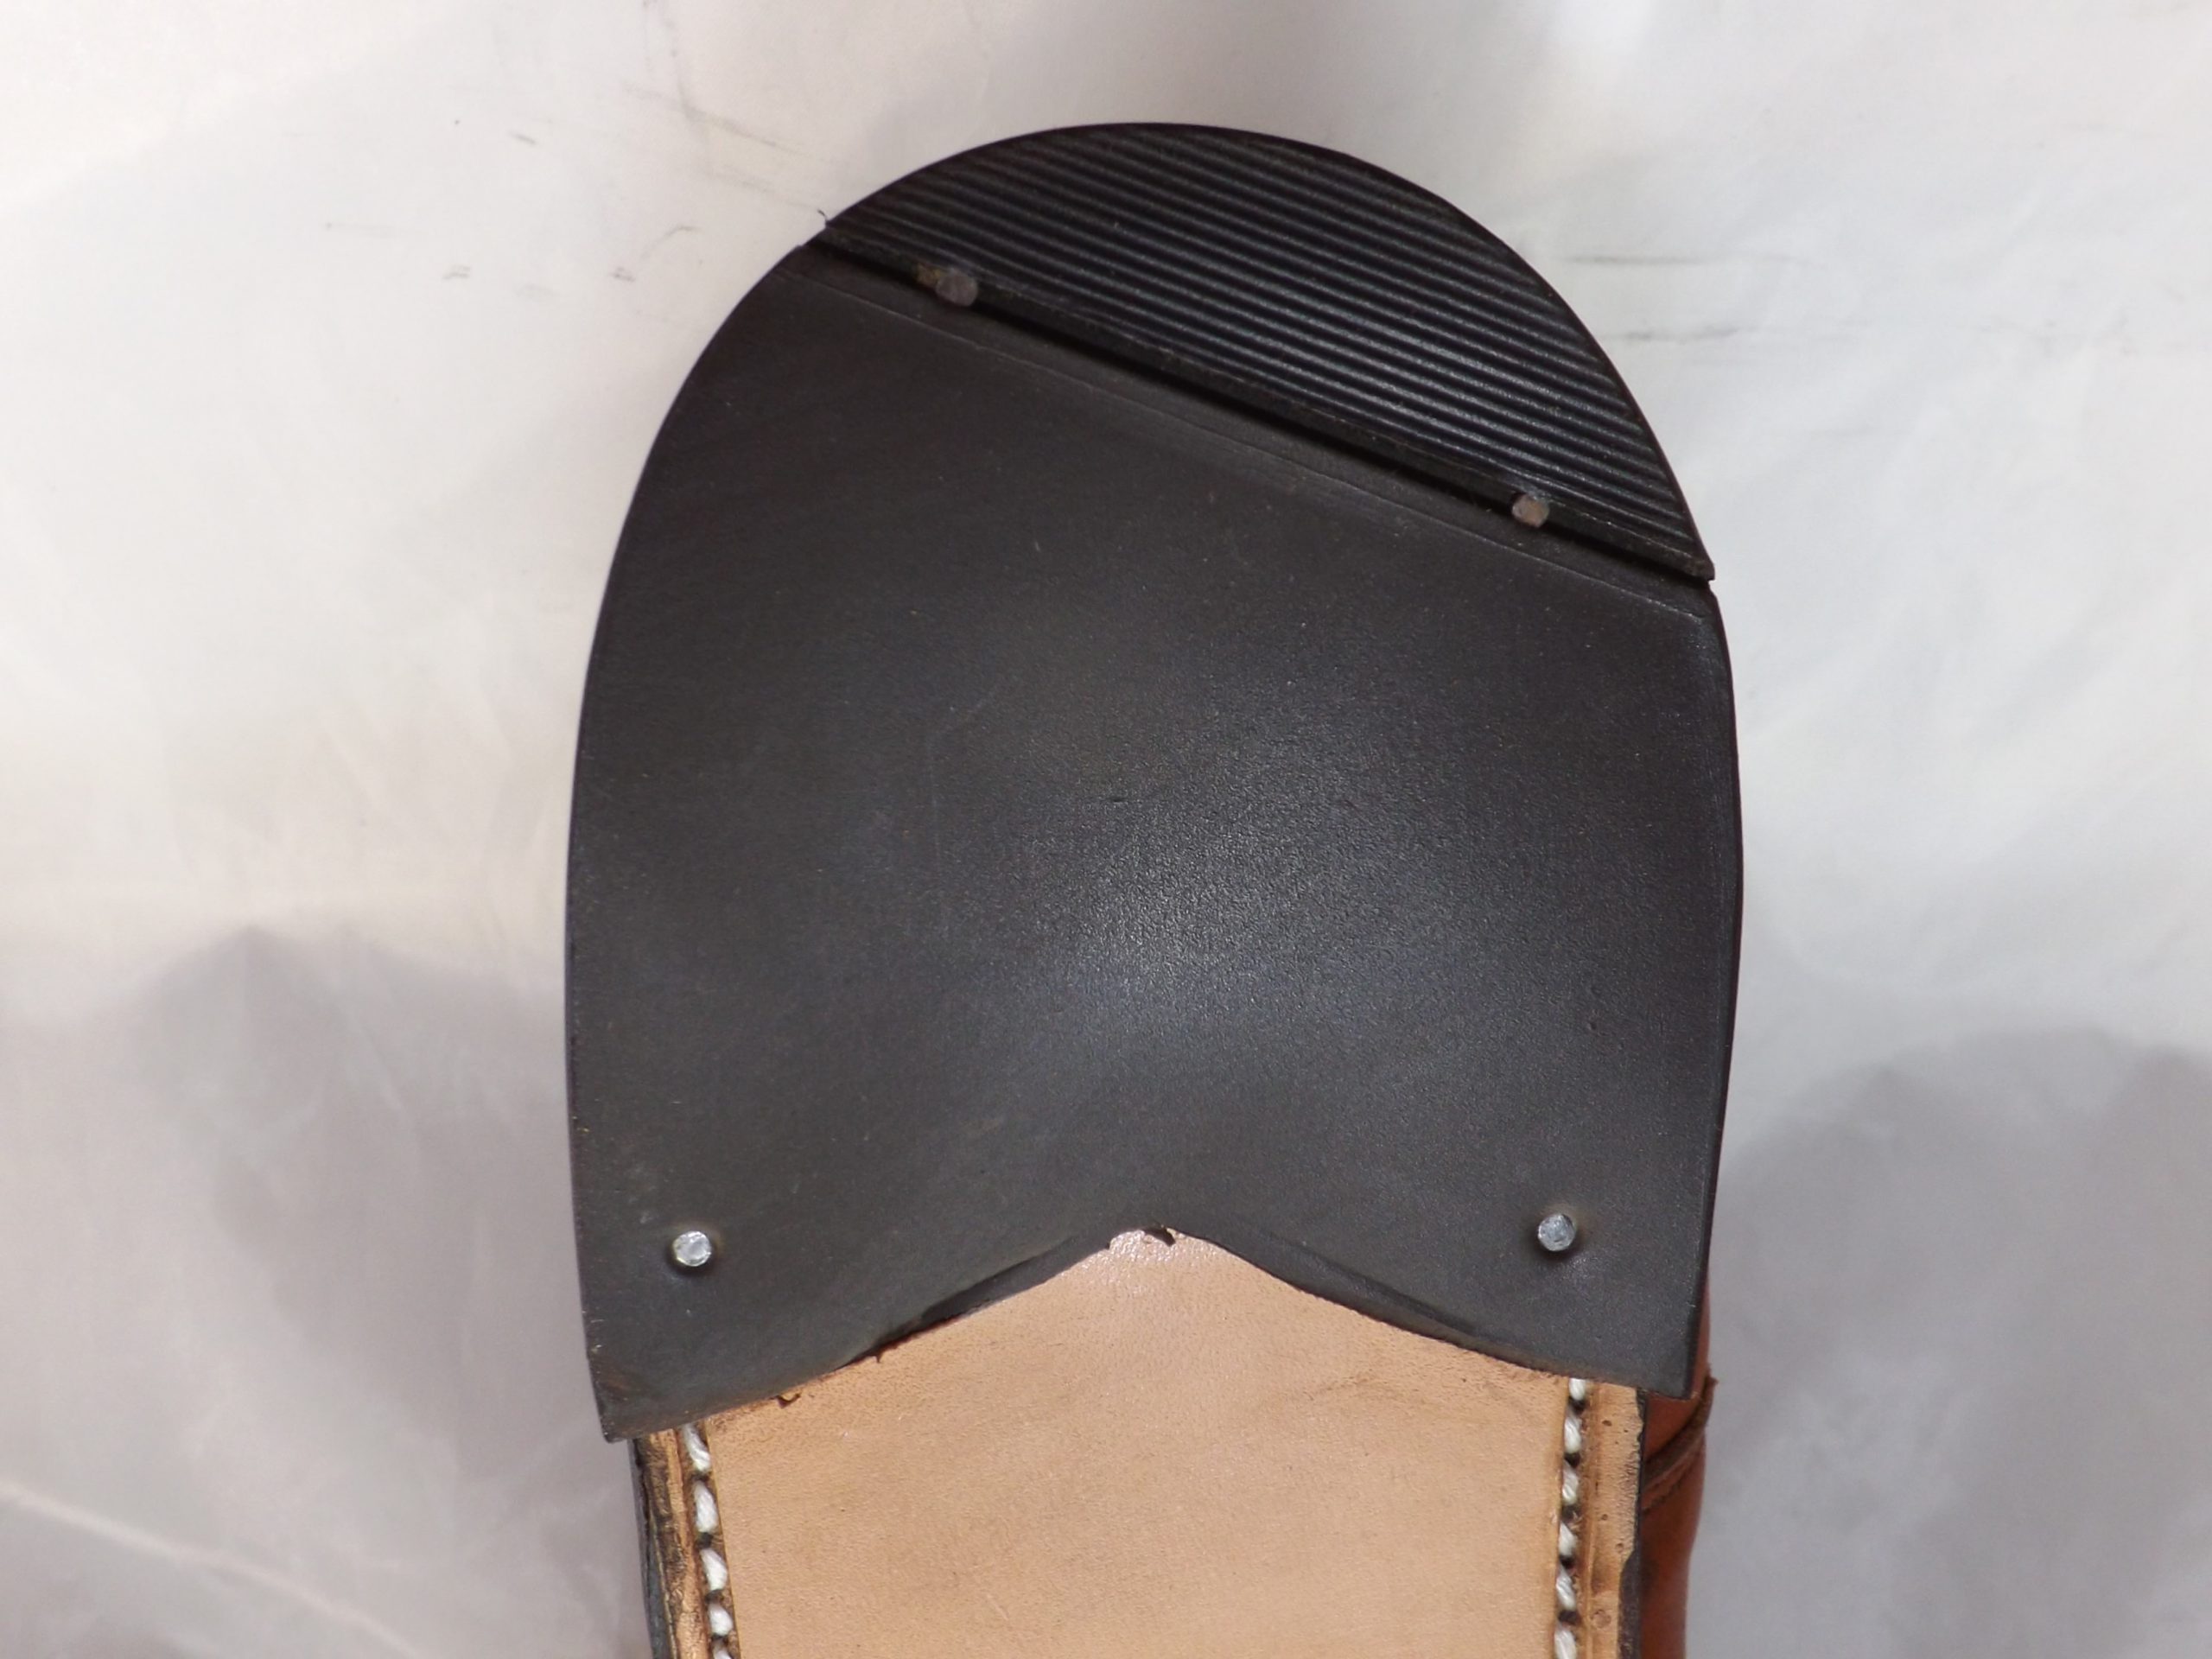 Shoe Replacement Rubber Half Sole and Heels - Mens Dress Shoes Bottom Sole Heel  Replacements - DIY Shoes Repair - The Vac Shop